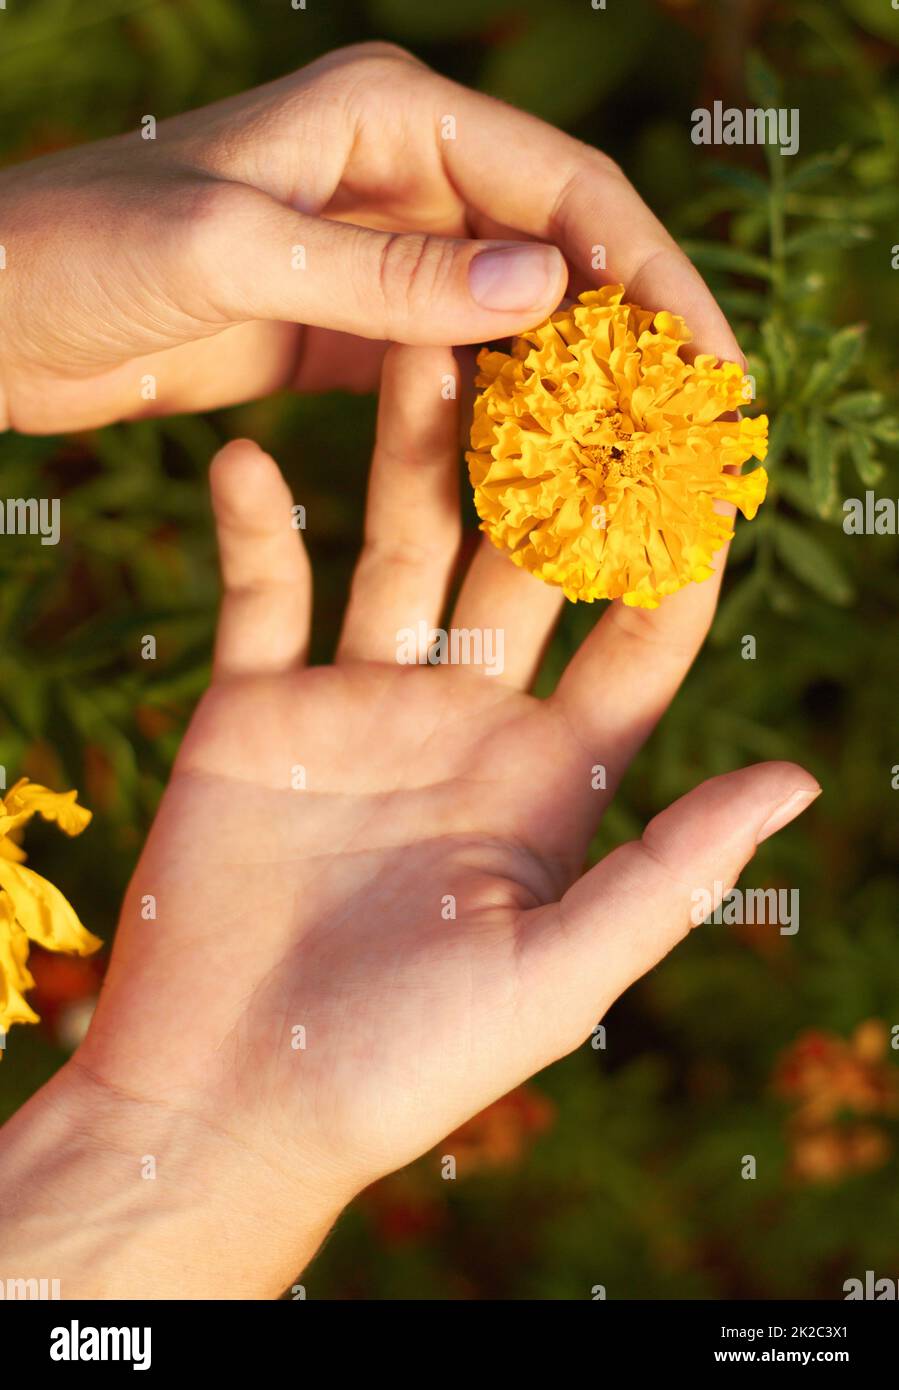 Appreciating Mother Natures gifts. Cropped shot of a woman holding a yellow fellow. Stock Photo